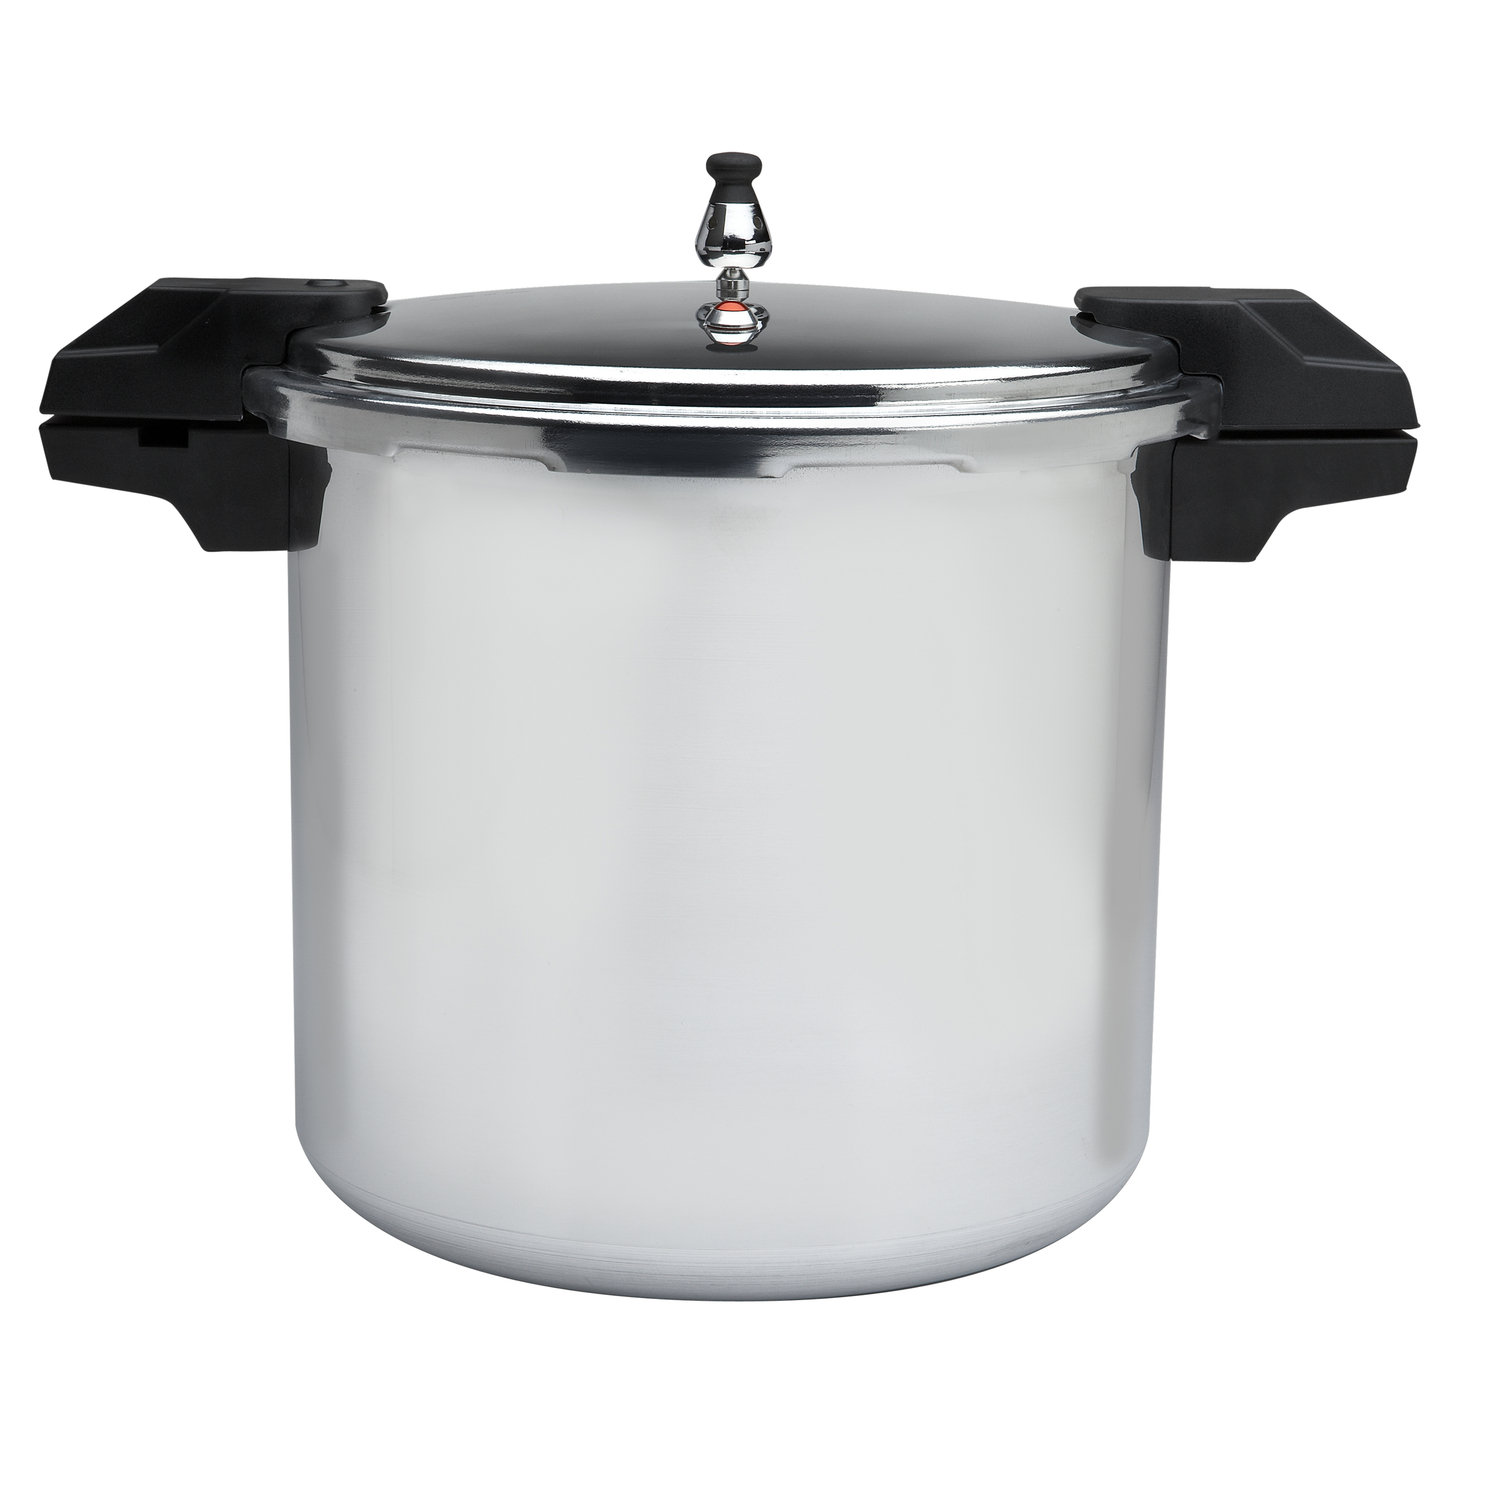 30-Cup Stovetop Commercial Pressure Cooker - Metallic